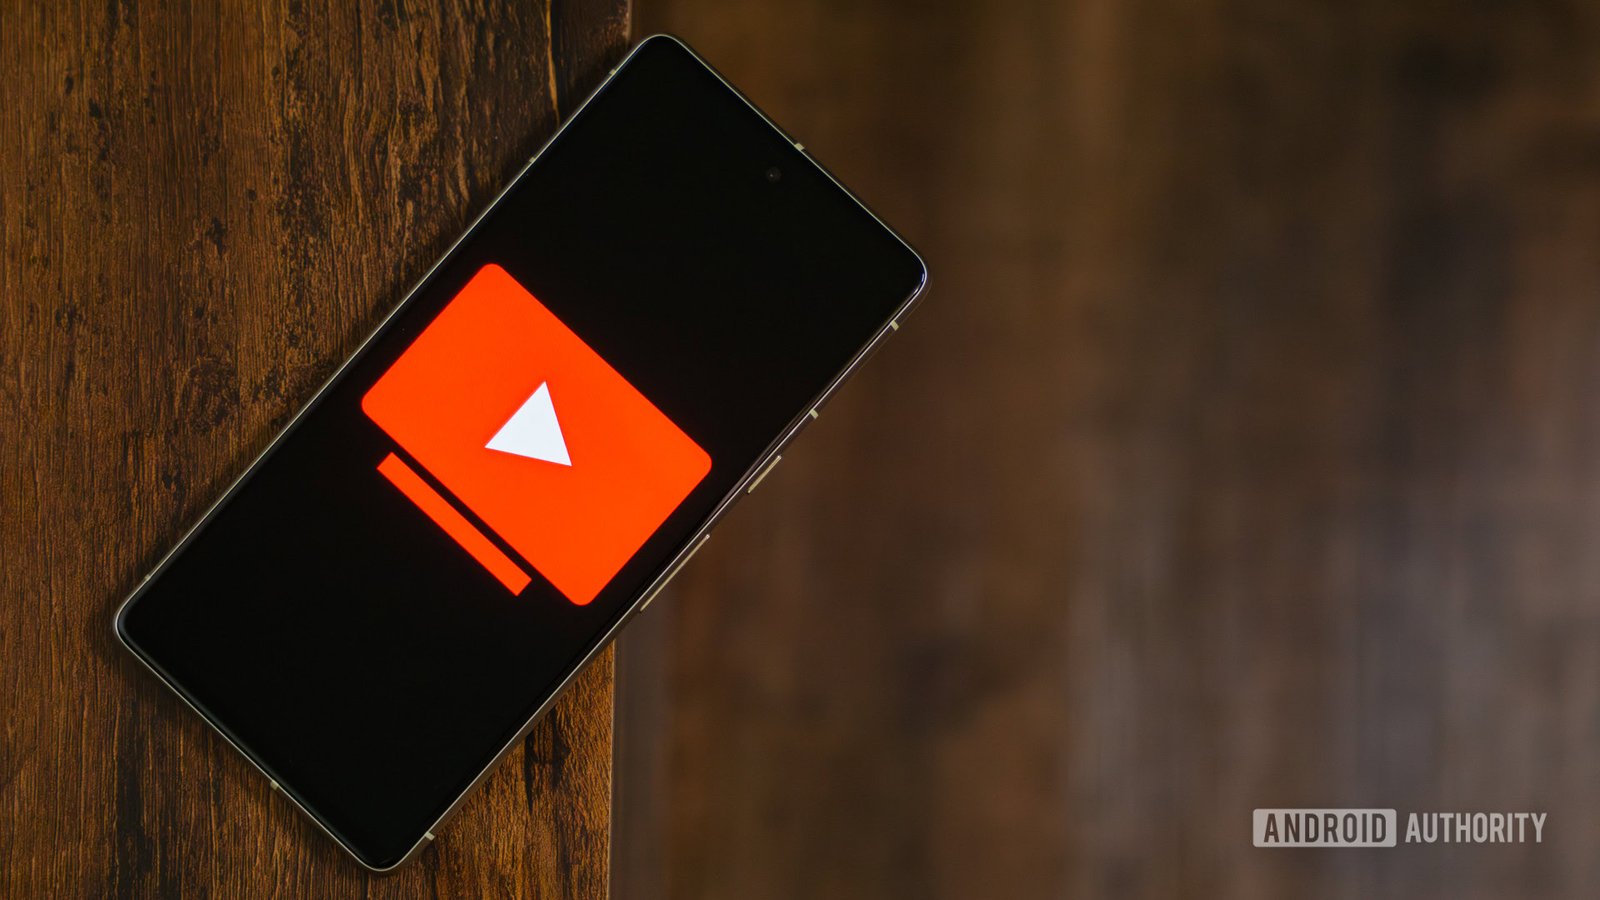 YouTube says it’s fighting NSFW ads, but here are some new ones